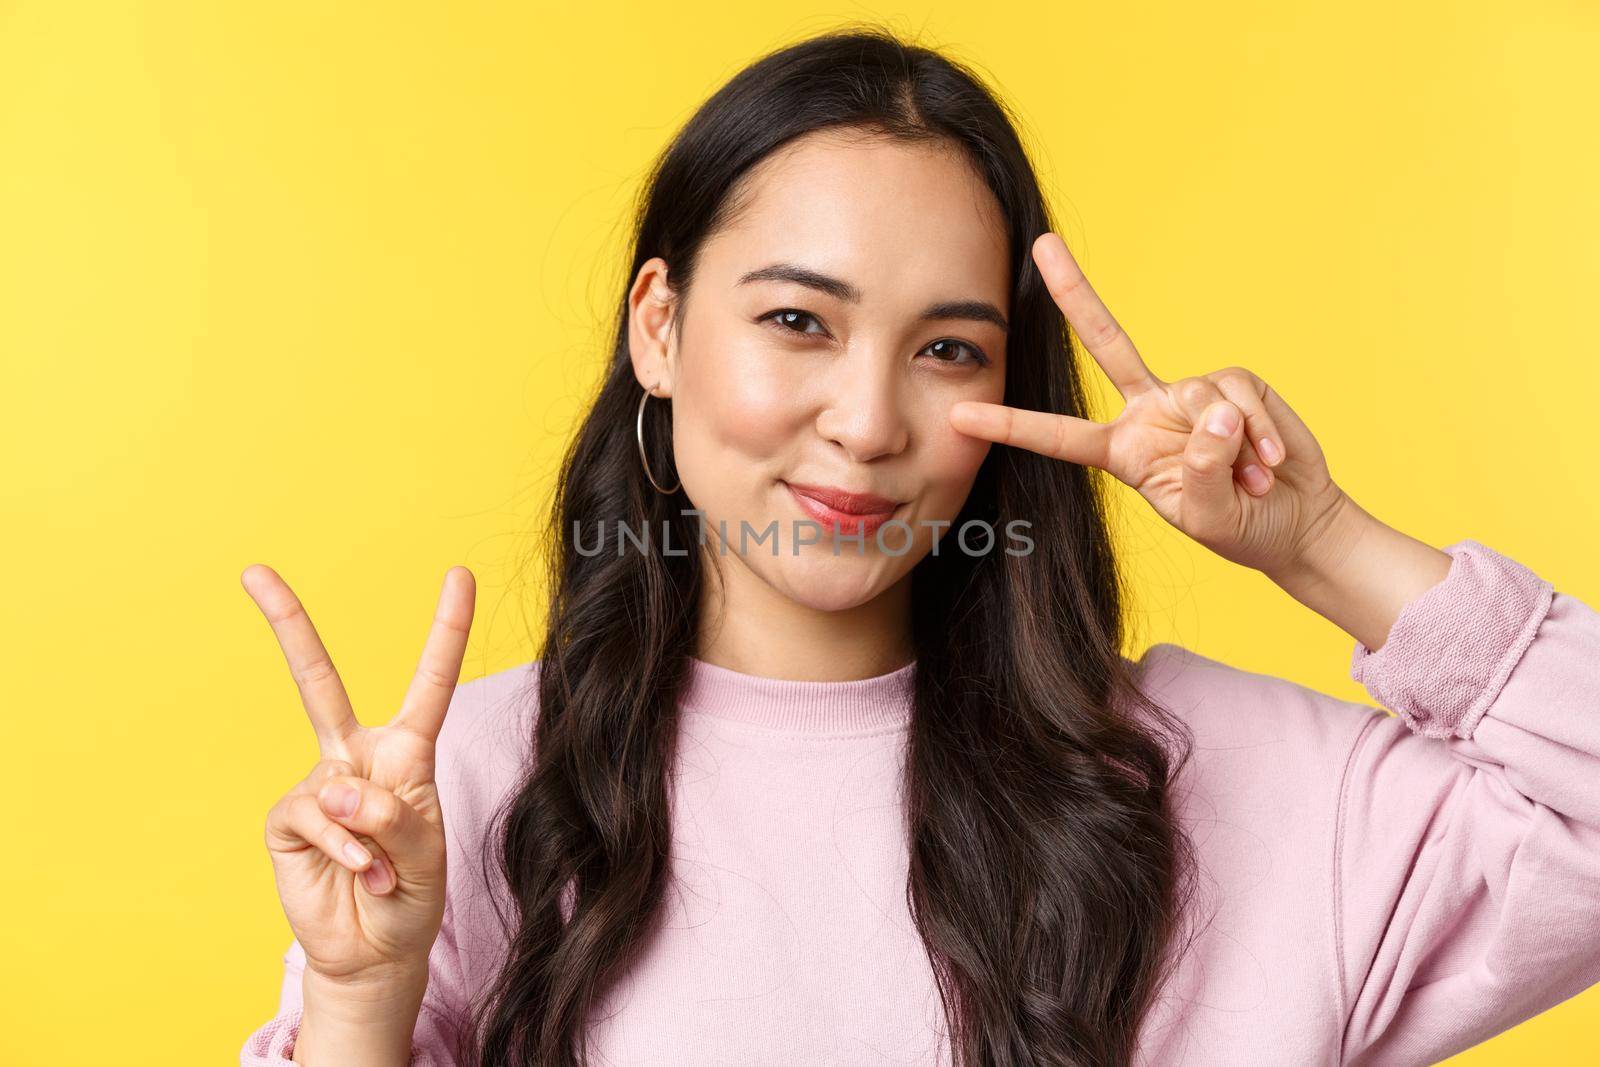 People emotions, lifestyle leisure and beauty concept. Kawaii pretty japanese girl showing peace signs and smiling cute, standing over yellow background advertising product.